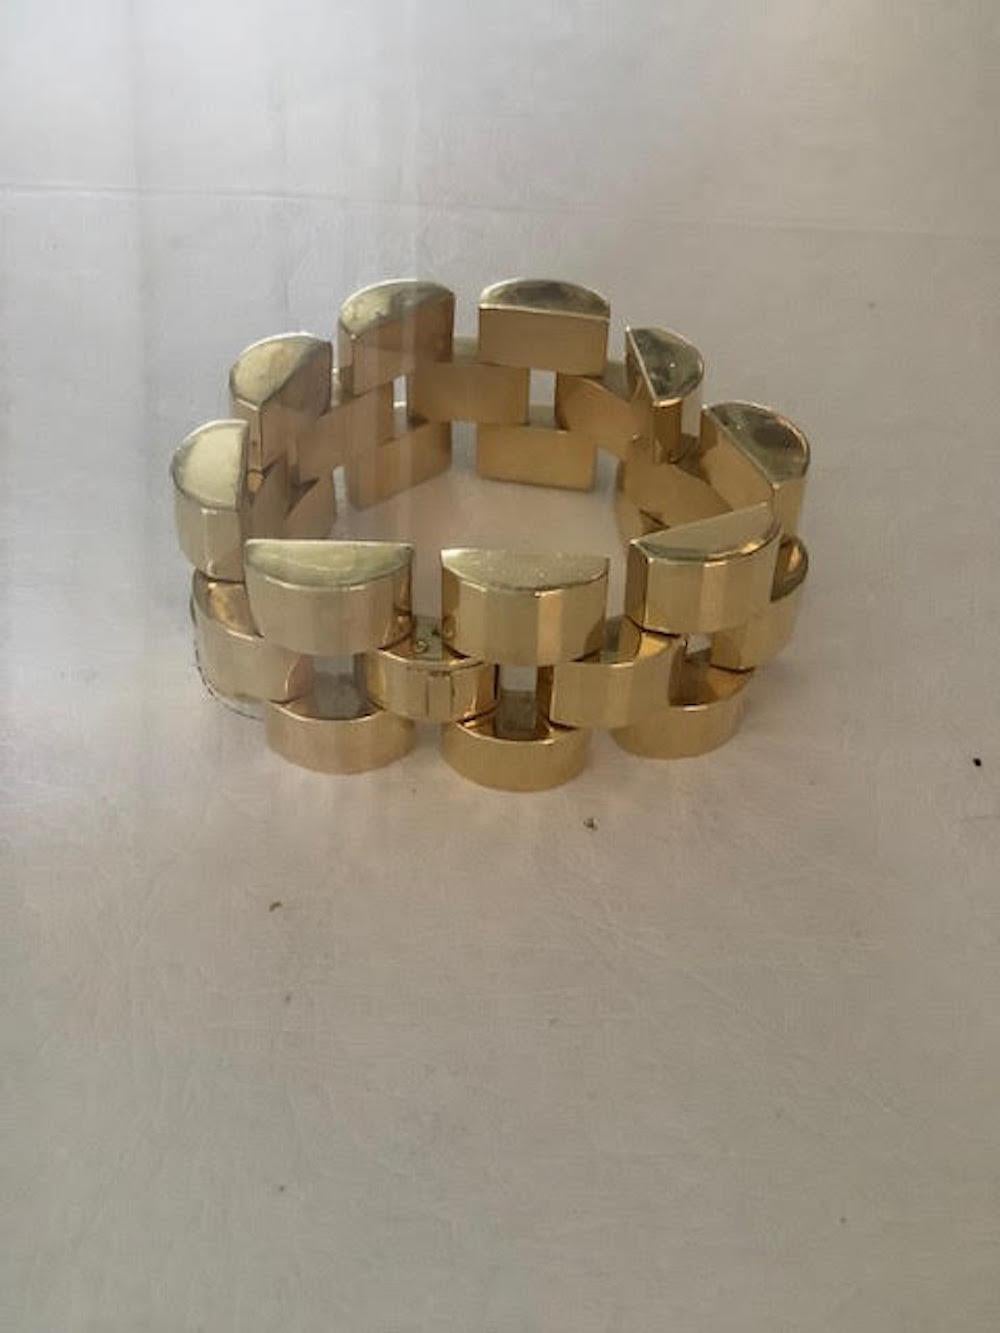 This stunning vintage 1980's 18K gold Italian link cuff bracelet is fabulous on the wrist. It is in the style of art deco influences and made in the 1980's or even before. It has staggered links of 18K gold as the design to form a cuff and is